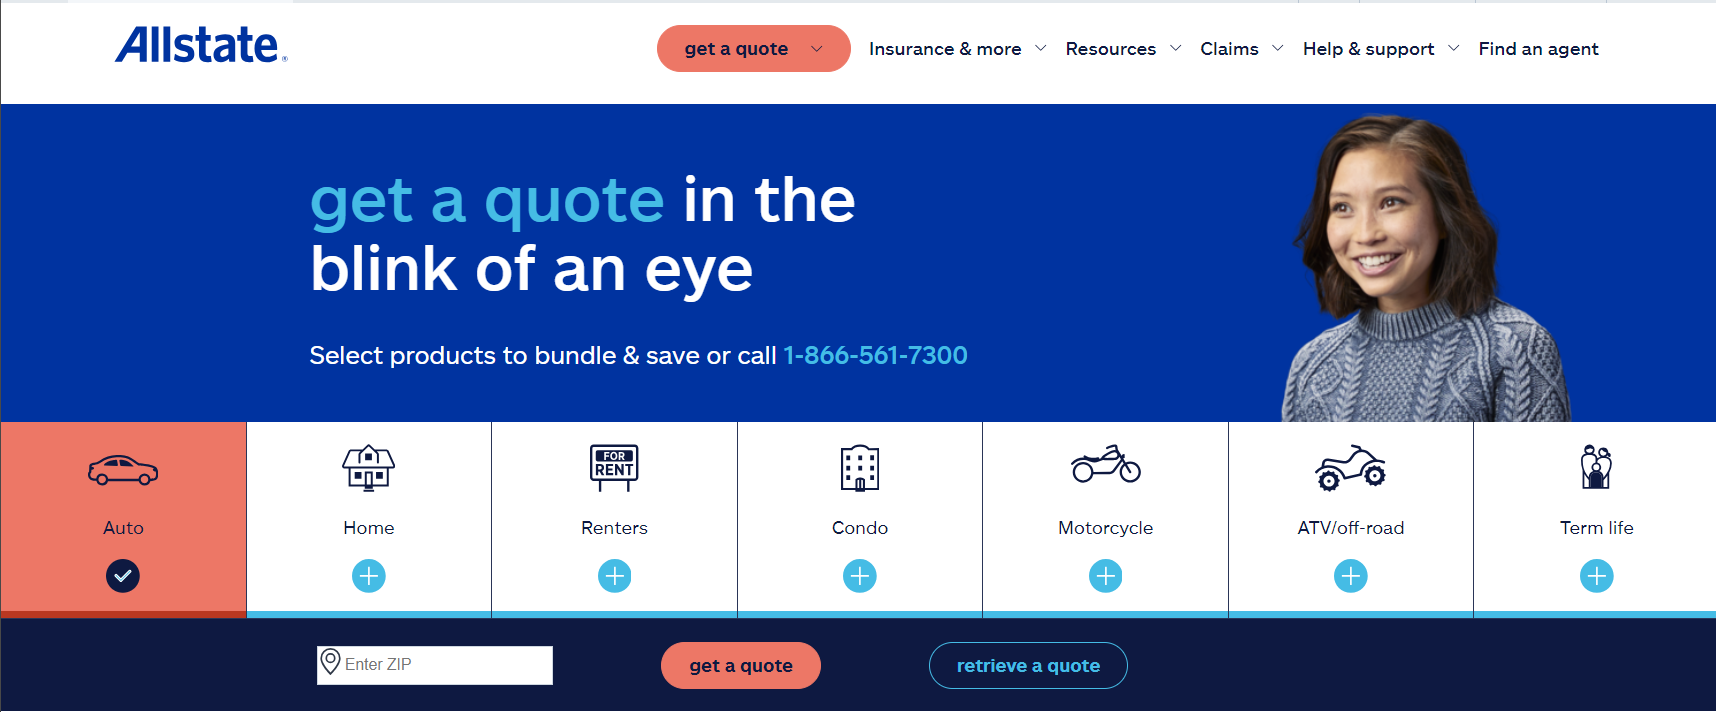 Allstate: Best Auto Insurance for Leased Vehicles